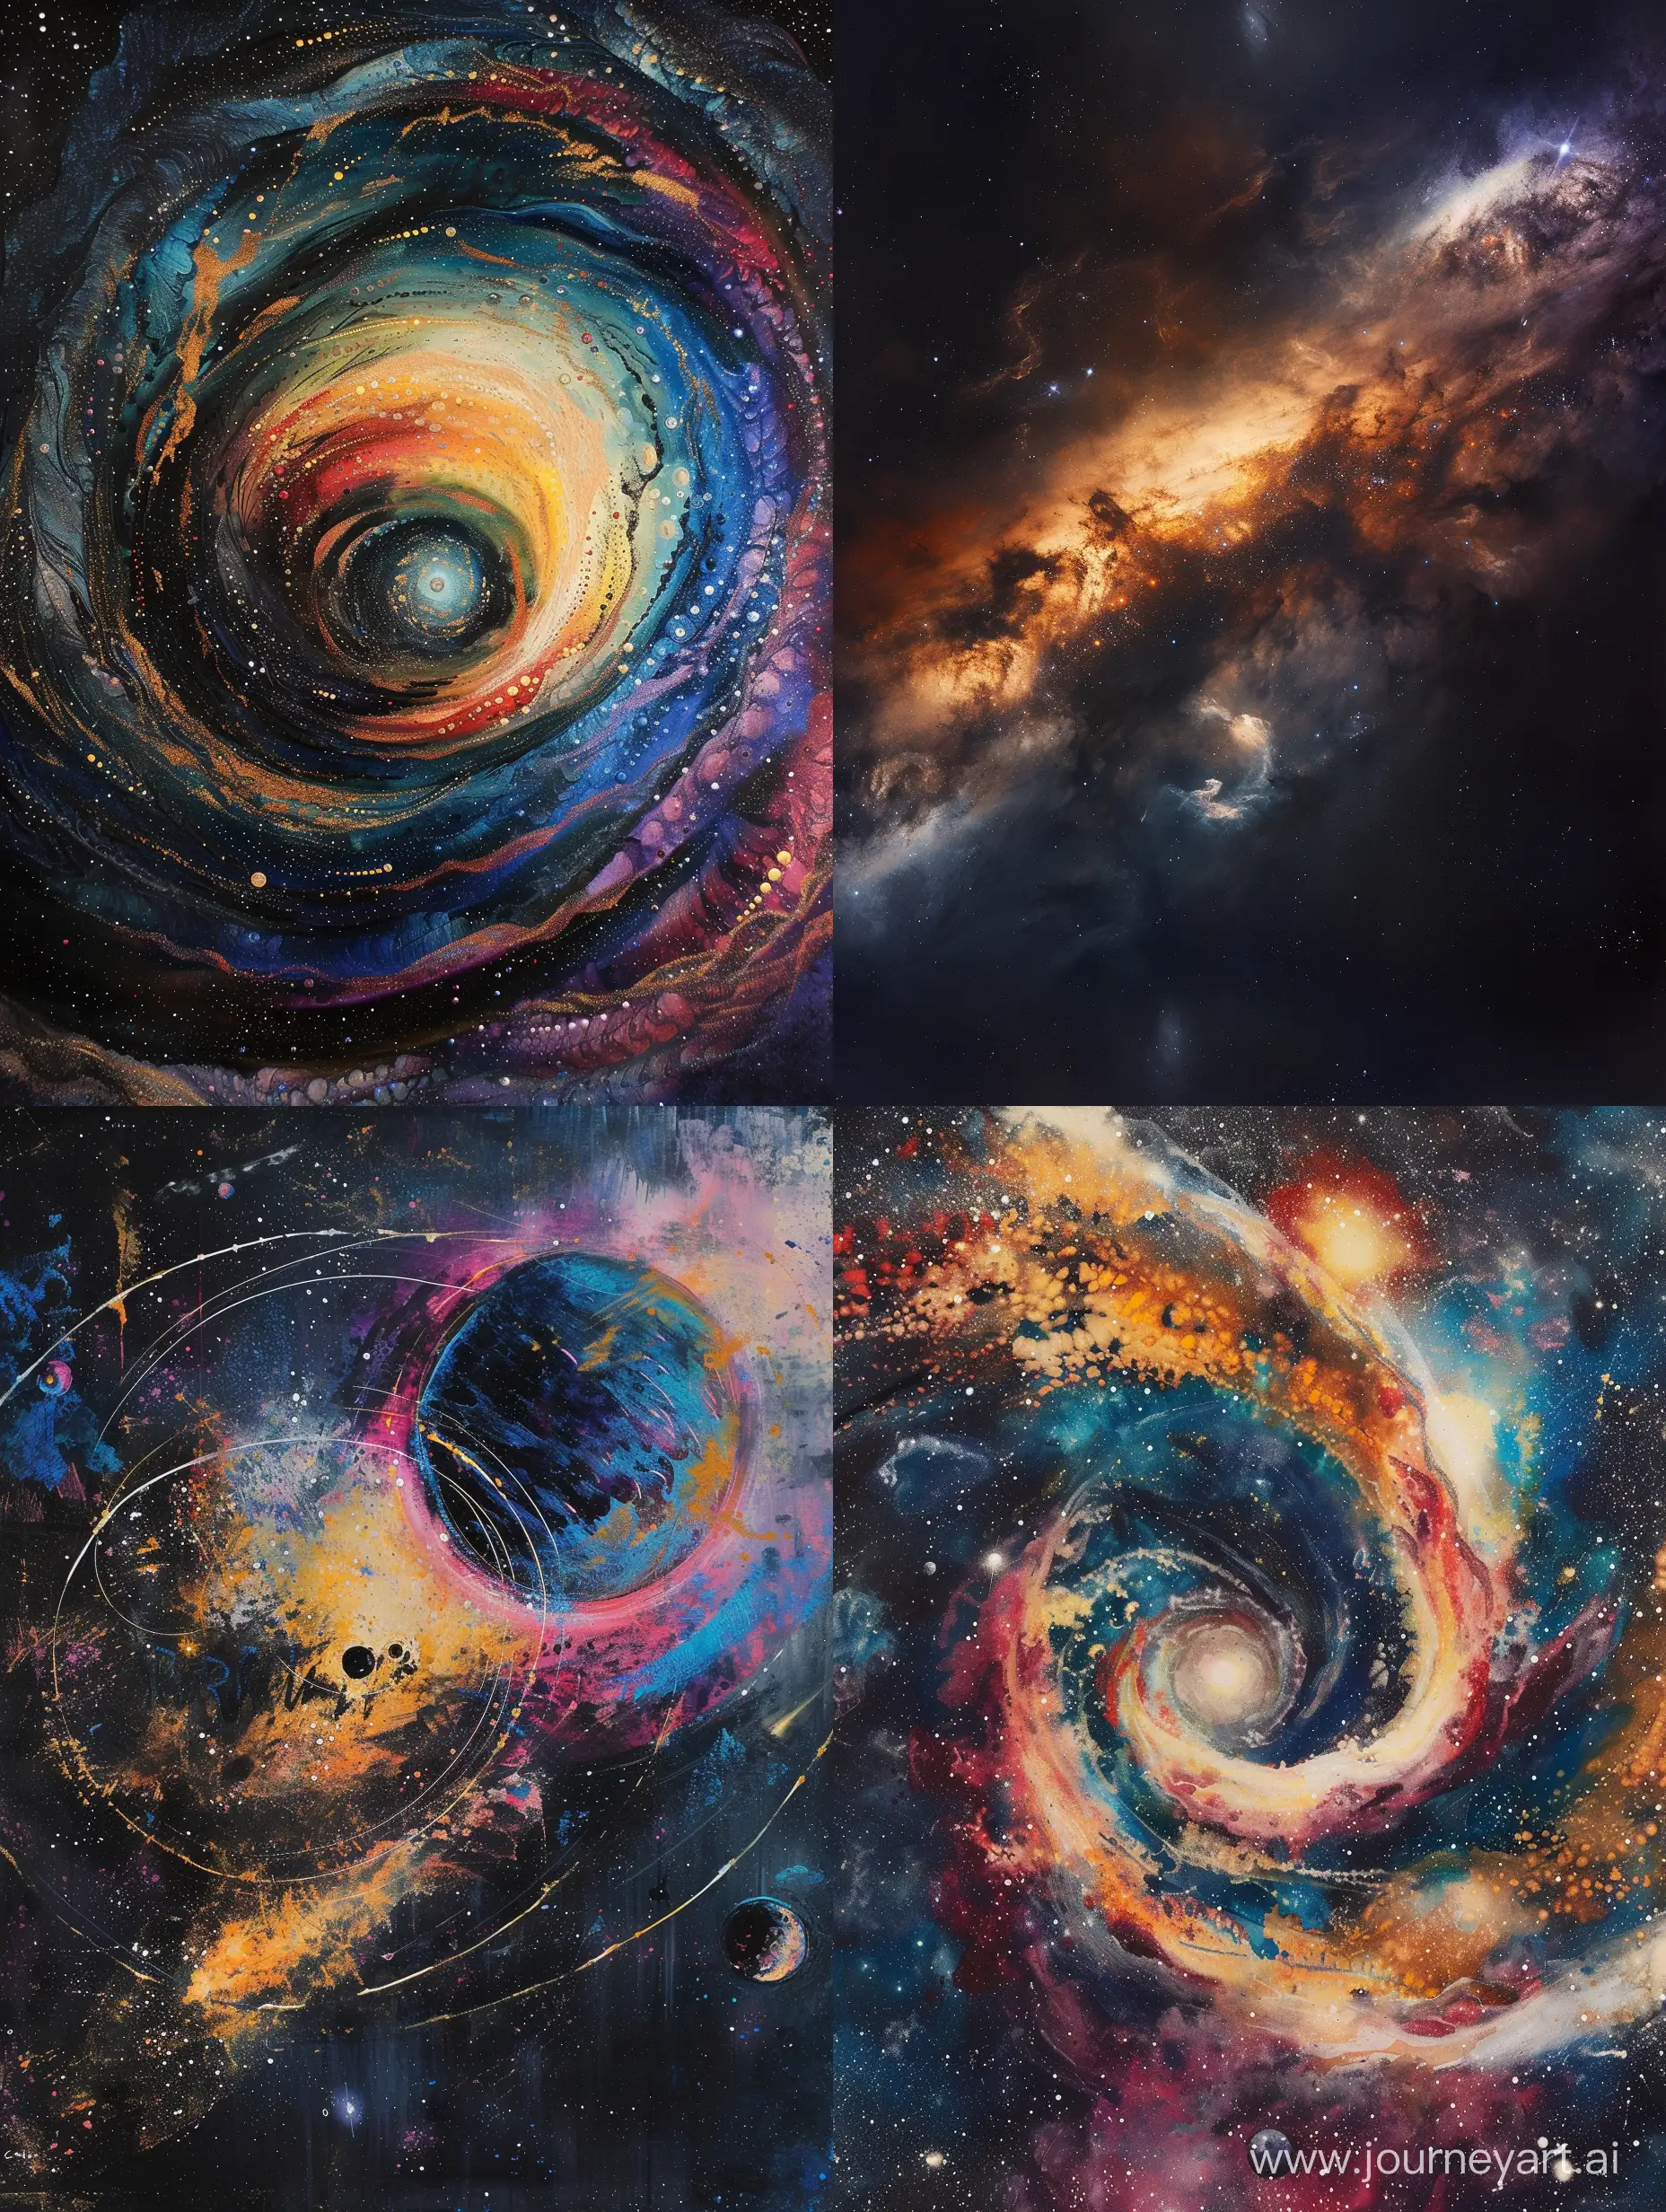 Vibrant-Cosmos-Landscape-with-Celestial-Bodies-and-Nebulae